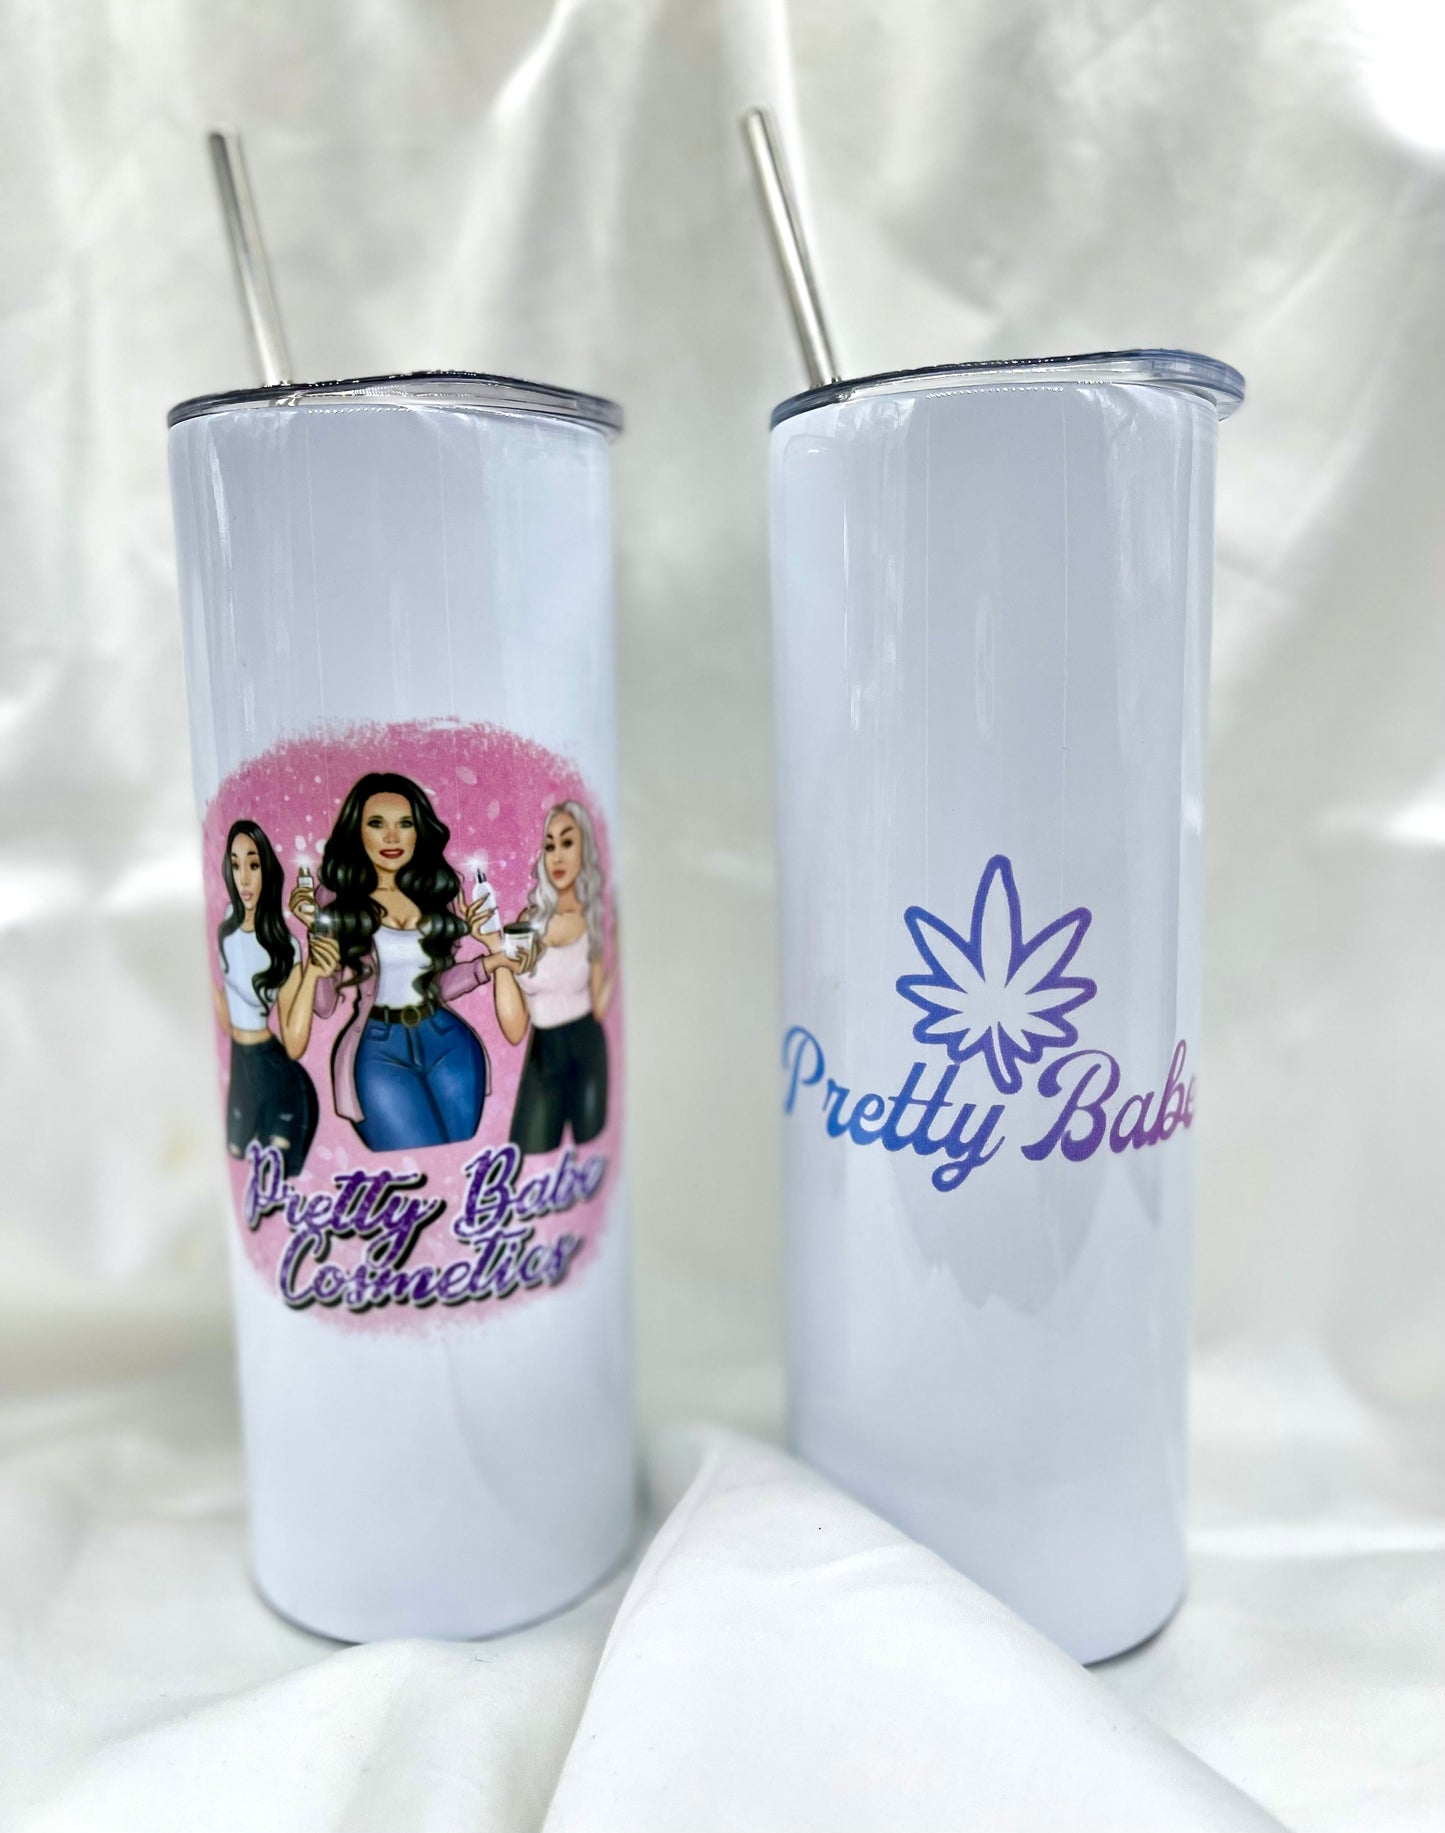 PrettyBabe's Stainless Steel Reusable Tumblers